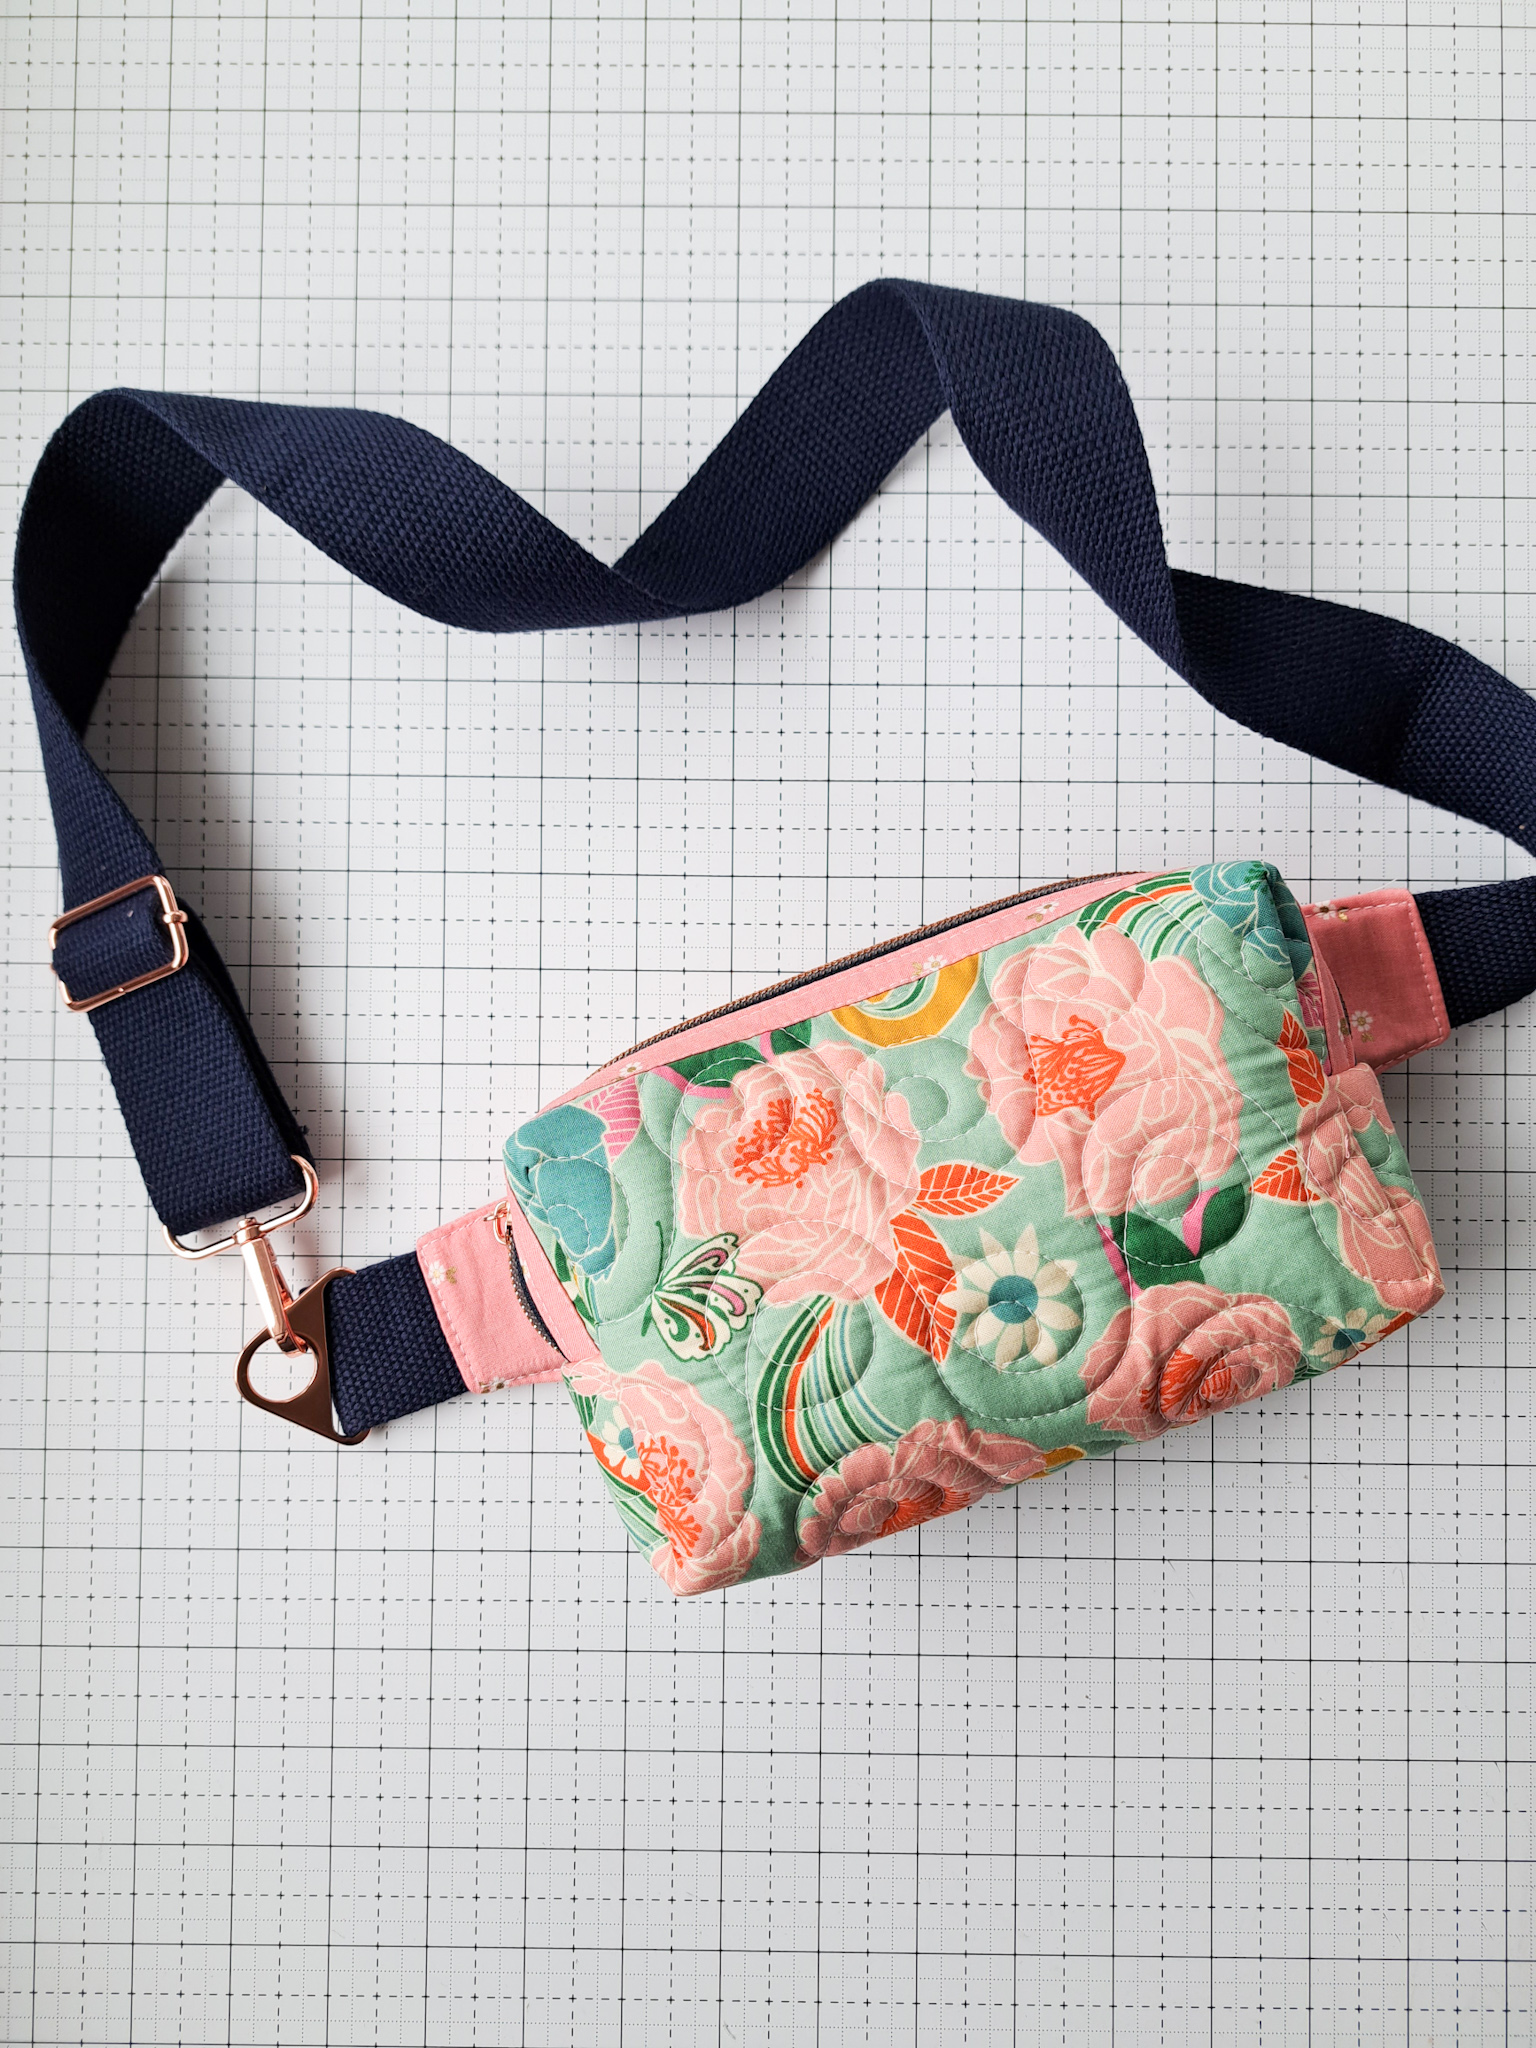 Hip Pouch Cross Body Bag Sewing Tutorial D Rings